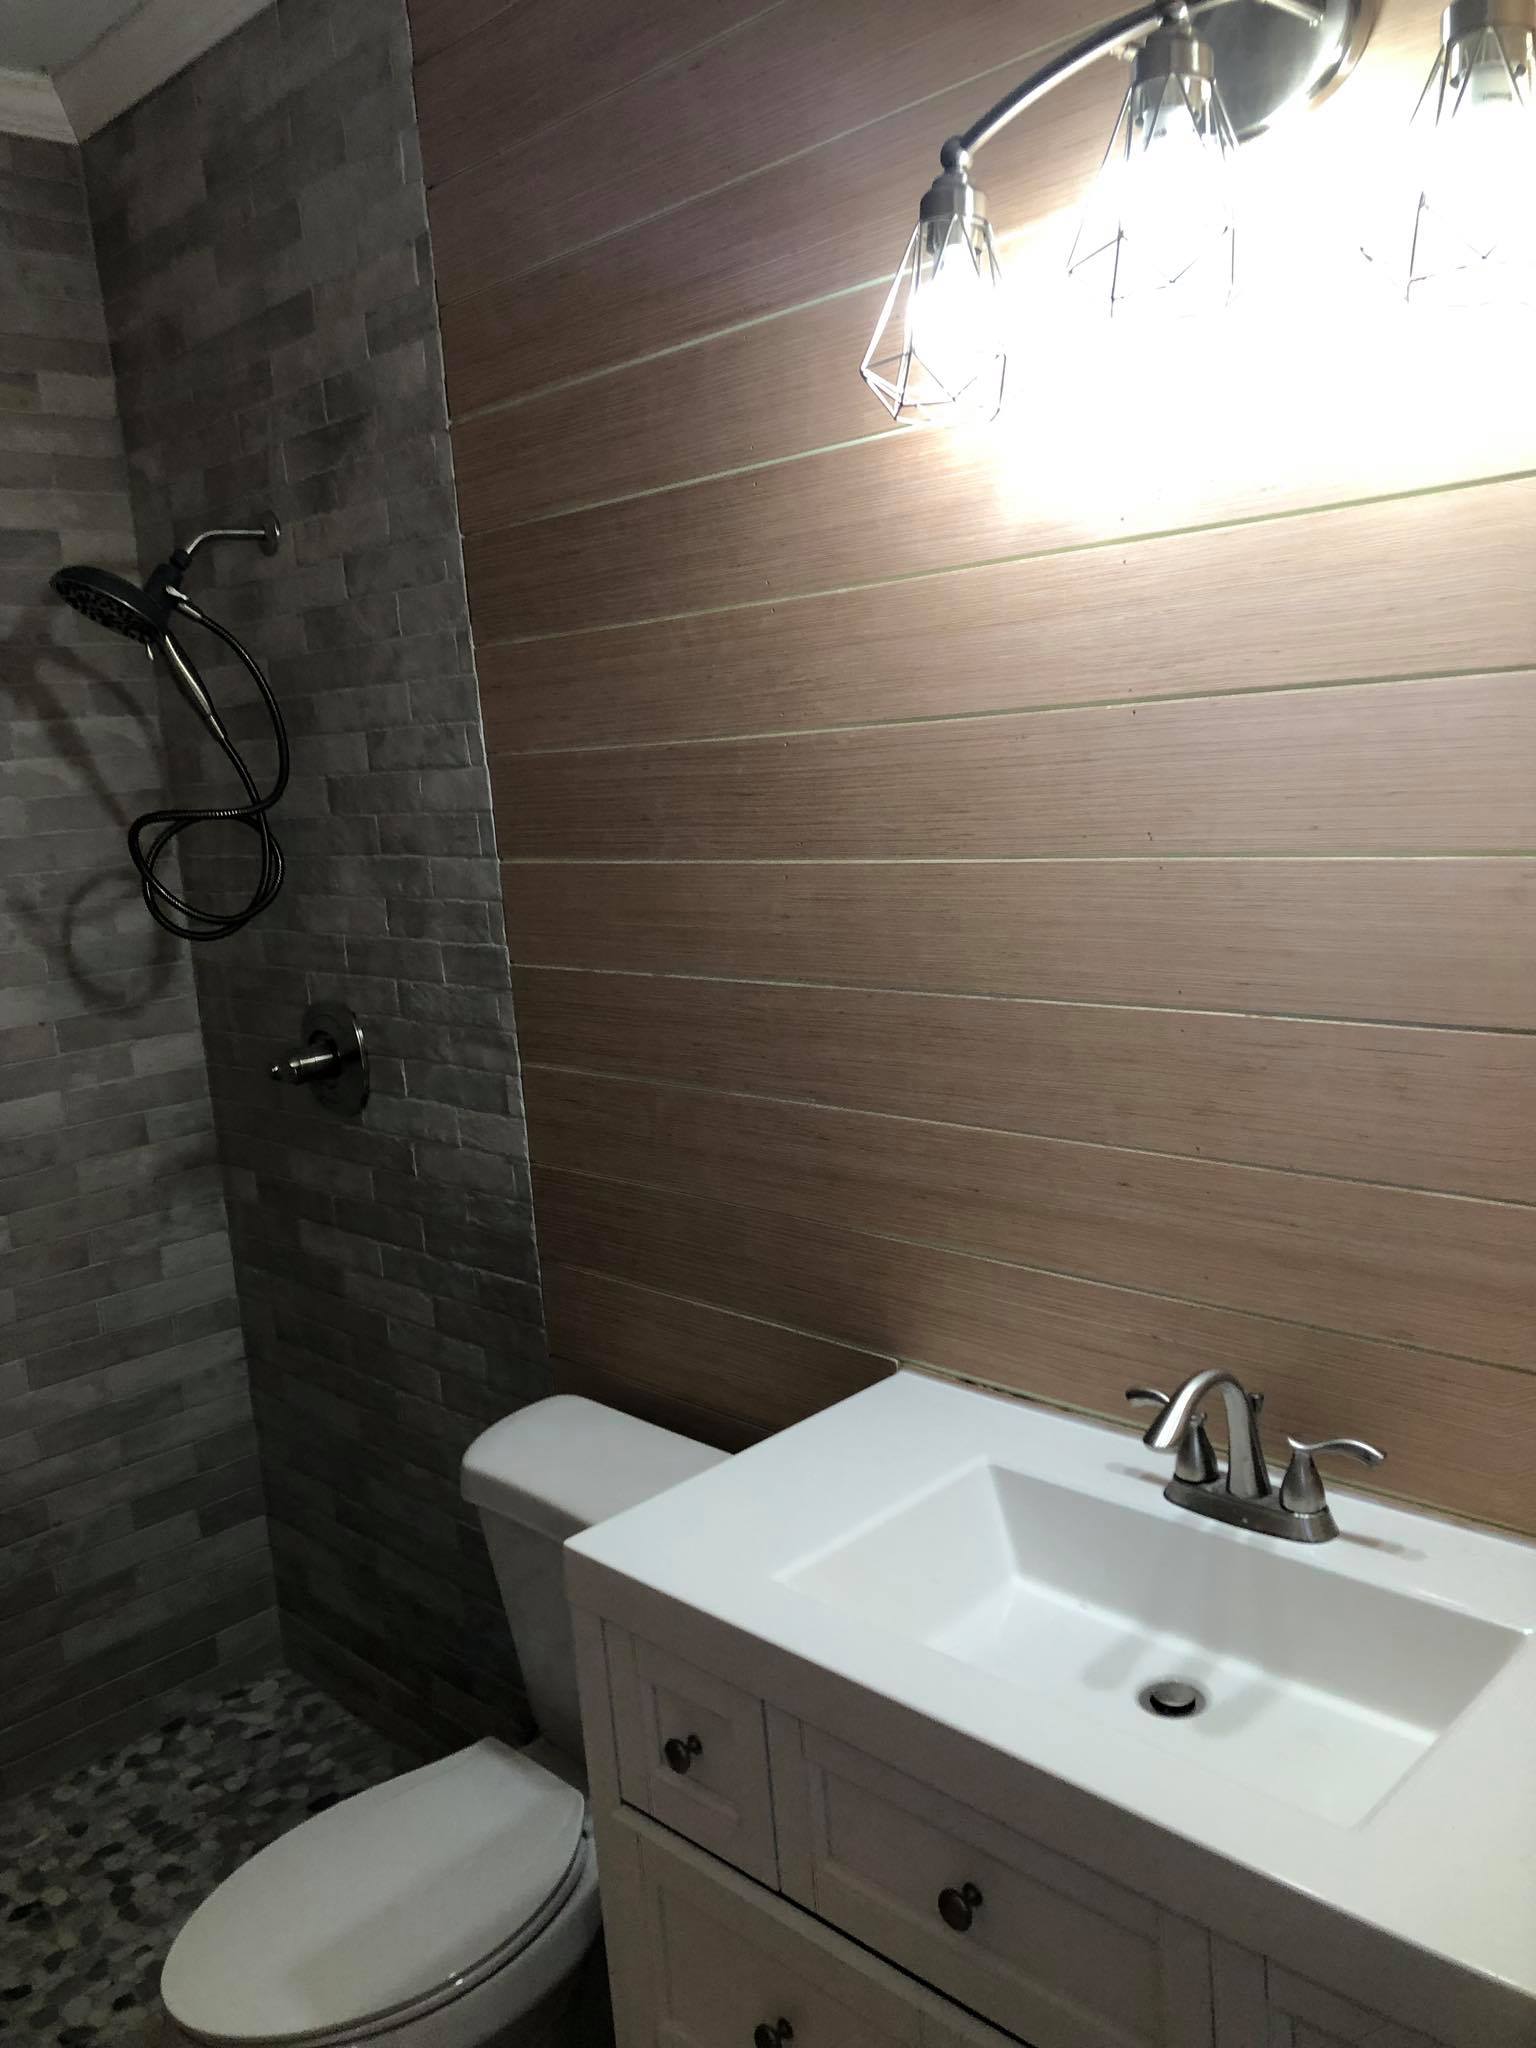 Bathroom Remodeling with New Tiles Showe and head 4